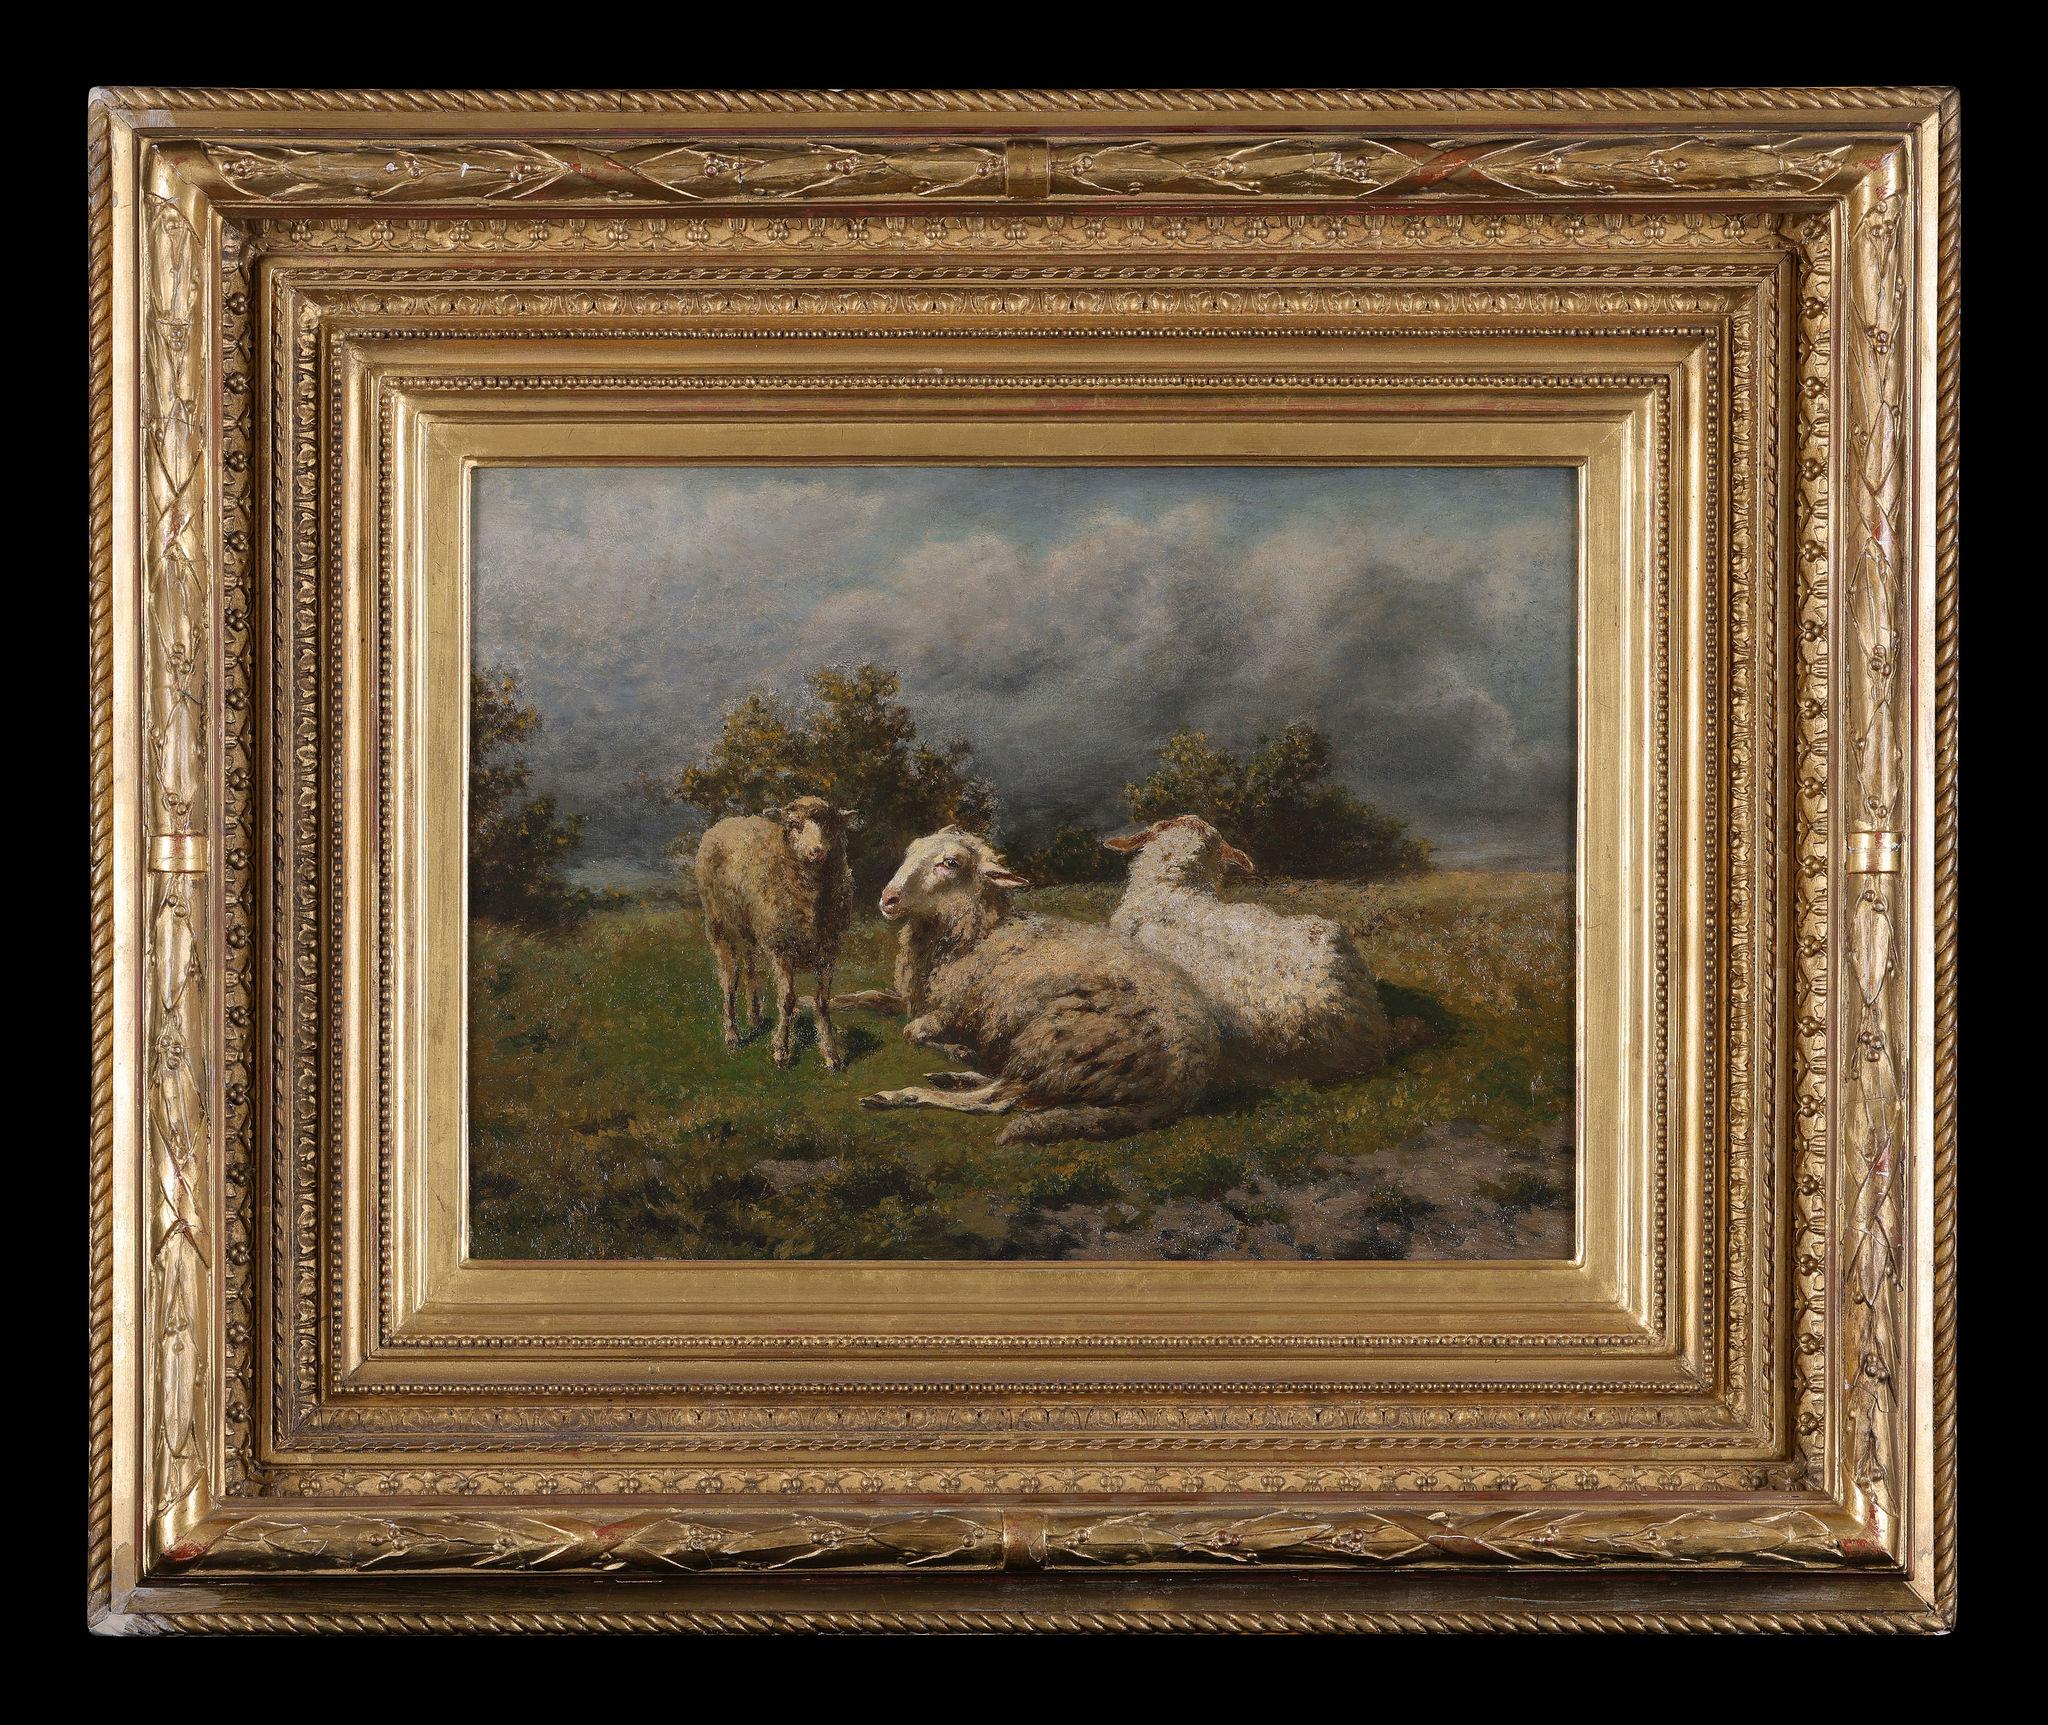 Sheep with their Lamb - Barbizon School Painting by Edouard Woutermaertens  